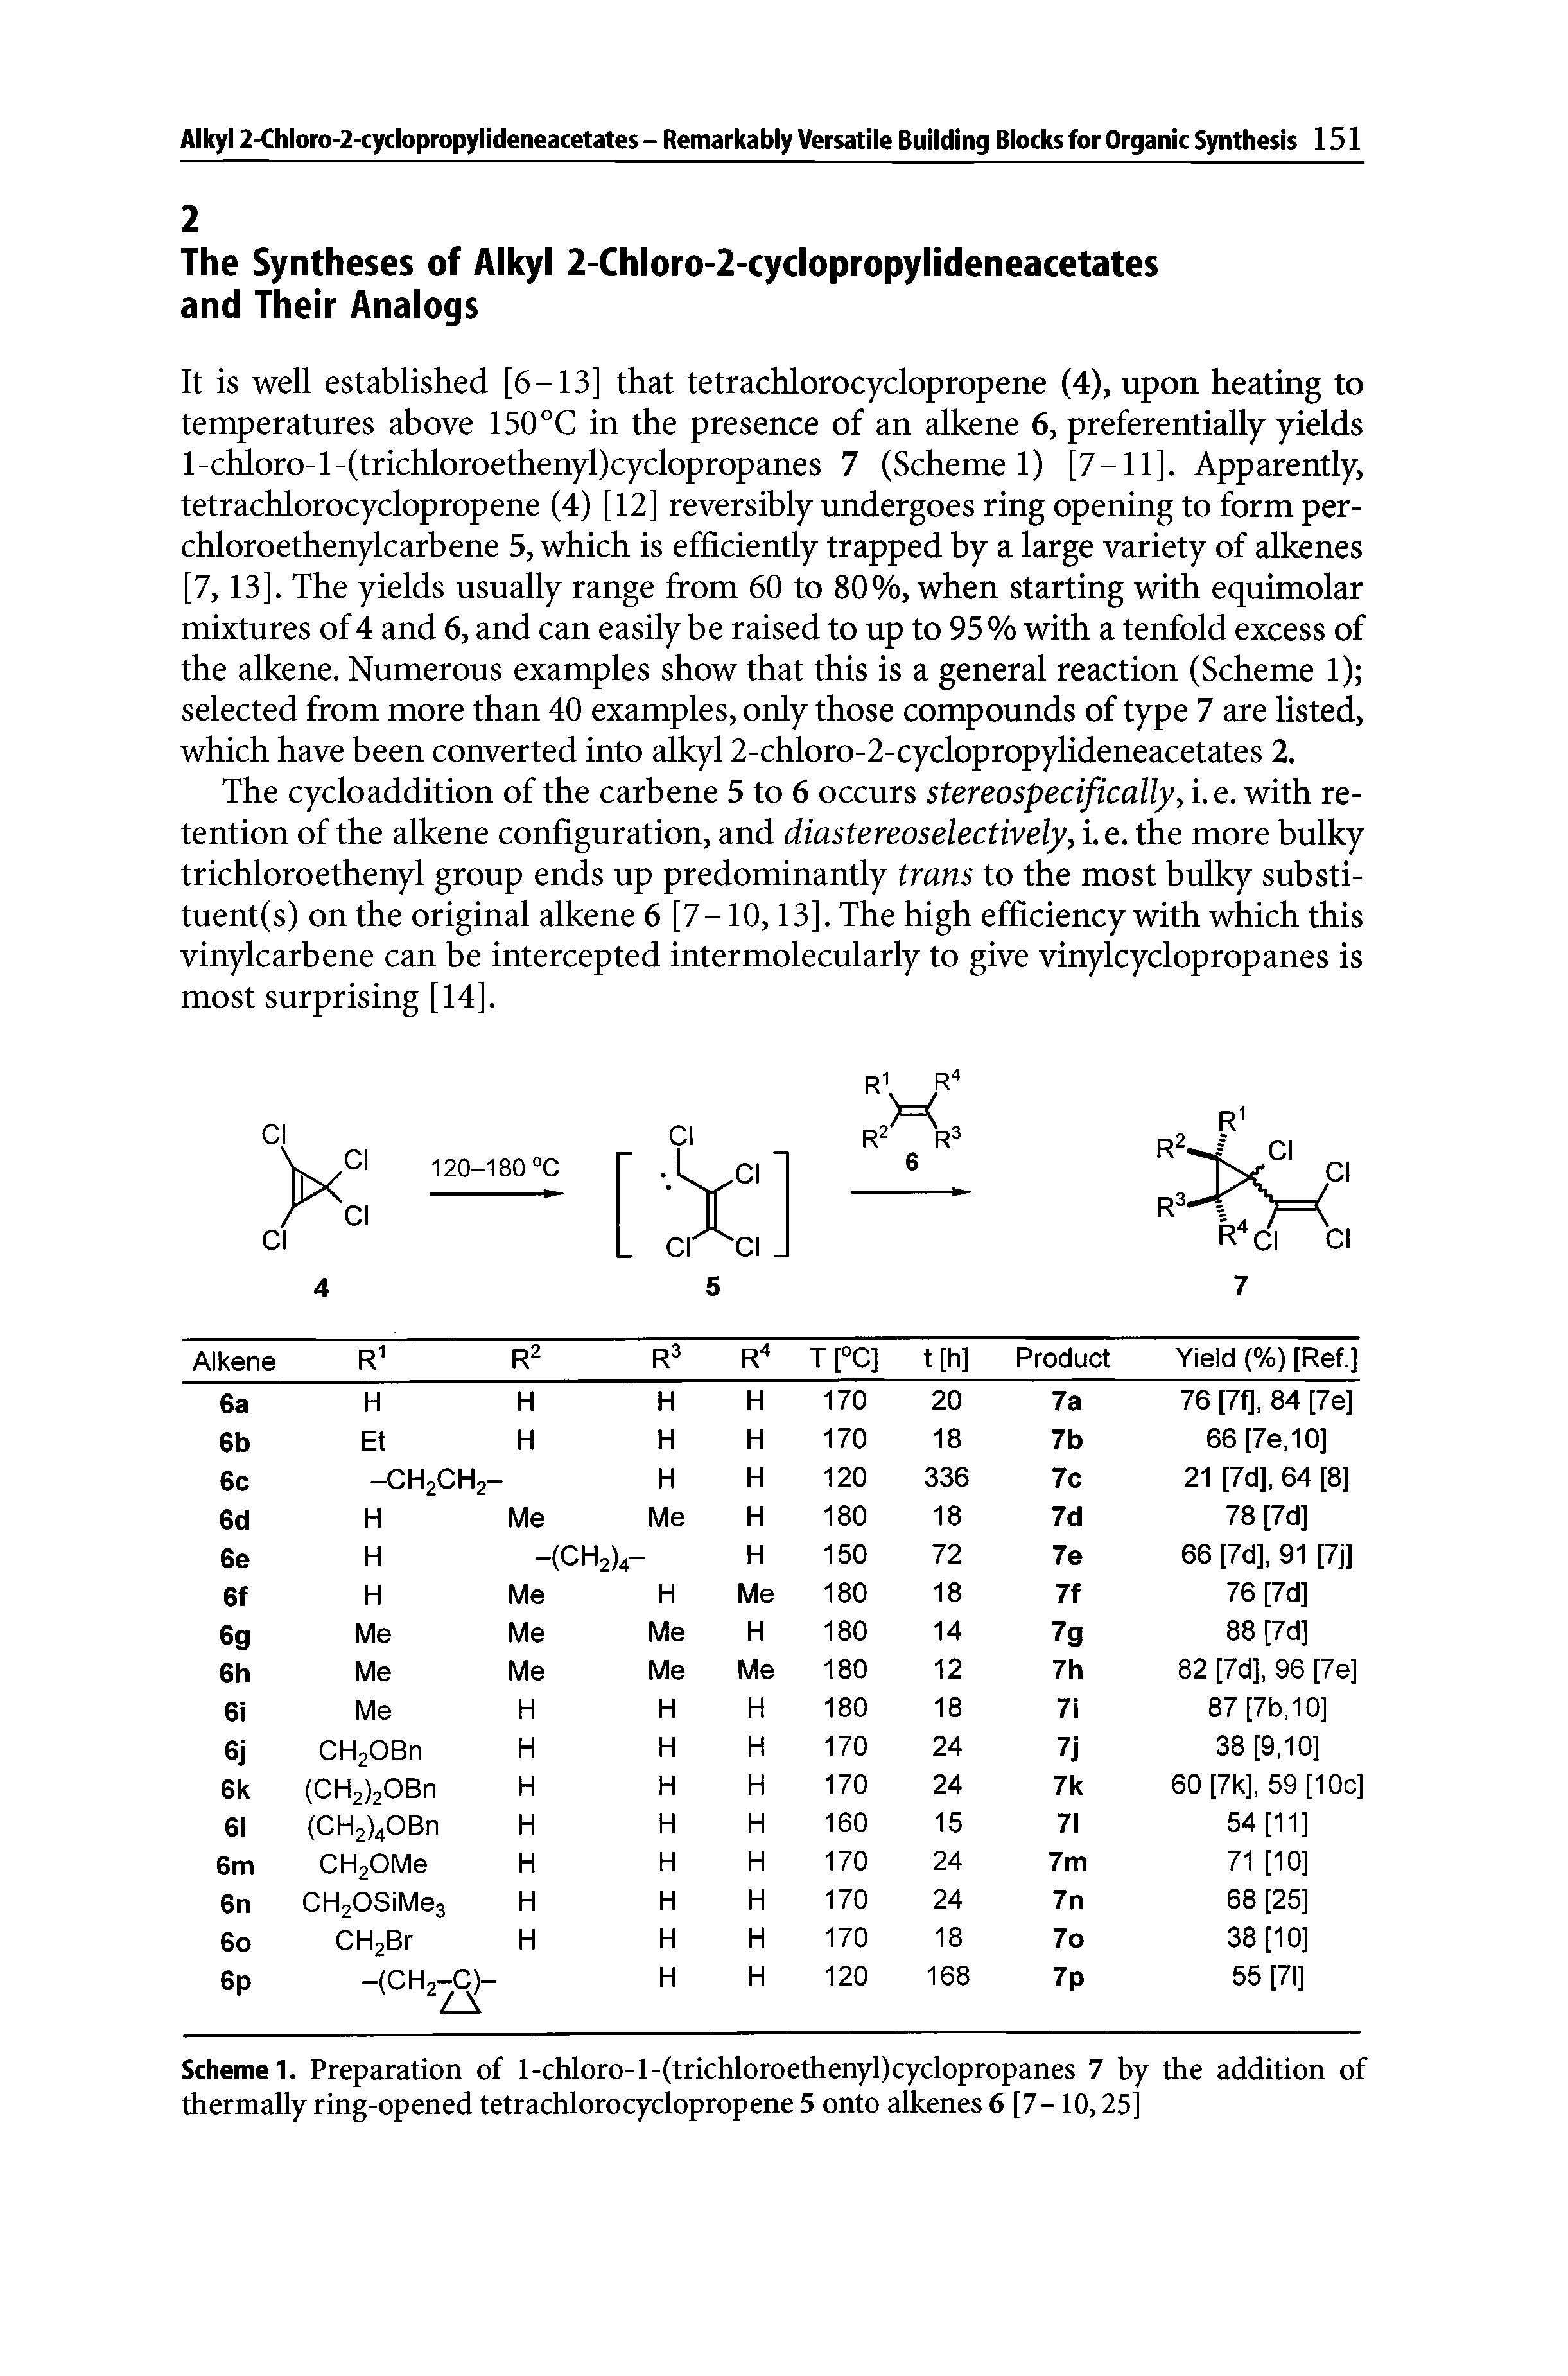 Scheme 1. Preparation of l-chloro-l-(trichloroethenyl)cyclopropanes 7 by the addition of thermally ring-opened tetrachlorocyclopropene 5 onto alkenes 6 [7-10,25]...